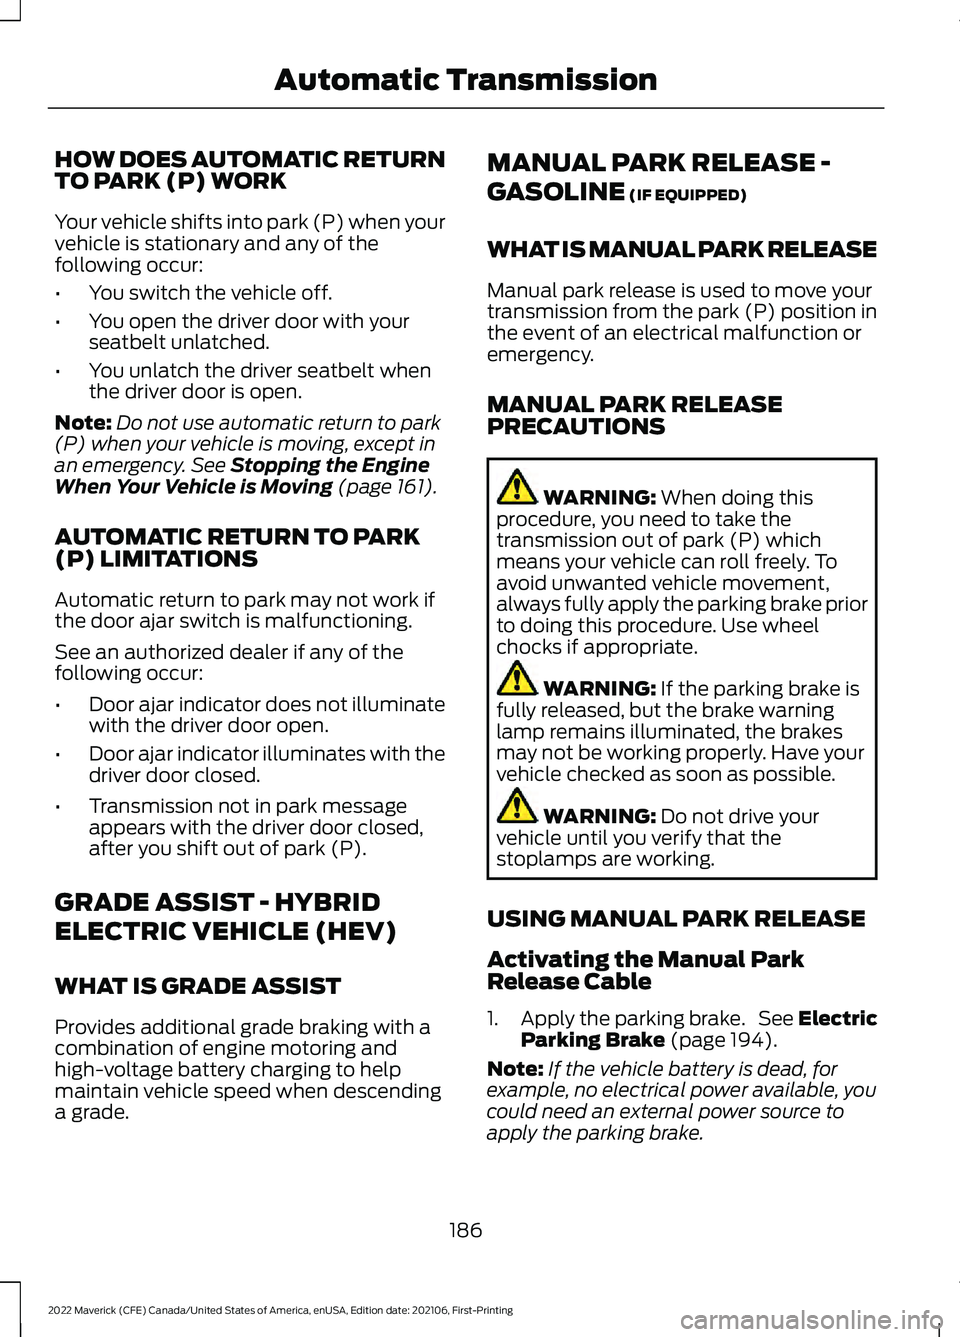 FORD MAVERICK 2022  Owners Manual HOW DOES AUTOMATIC RETURN
TO PARK (P) WORK
Your vehicle shifts into park (P) when your
vehicle is stationary and any of the
following occur:
•
You switch the vehicle off.
• You open the driver doo